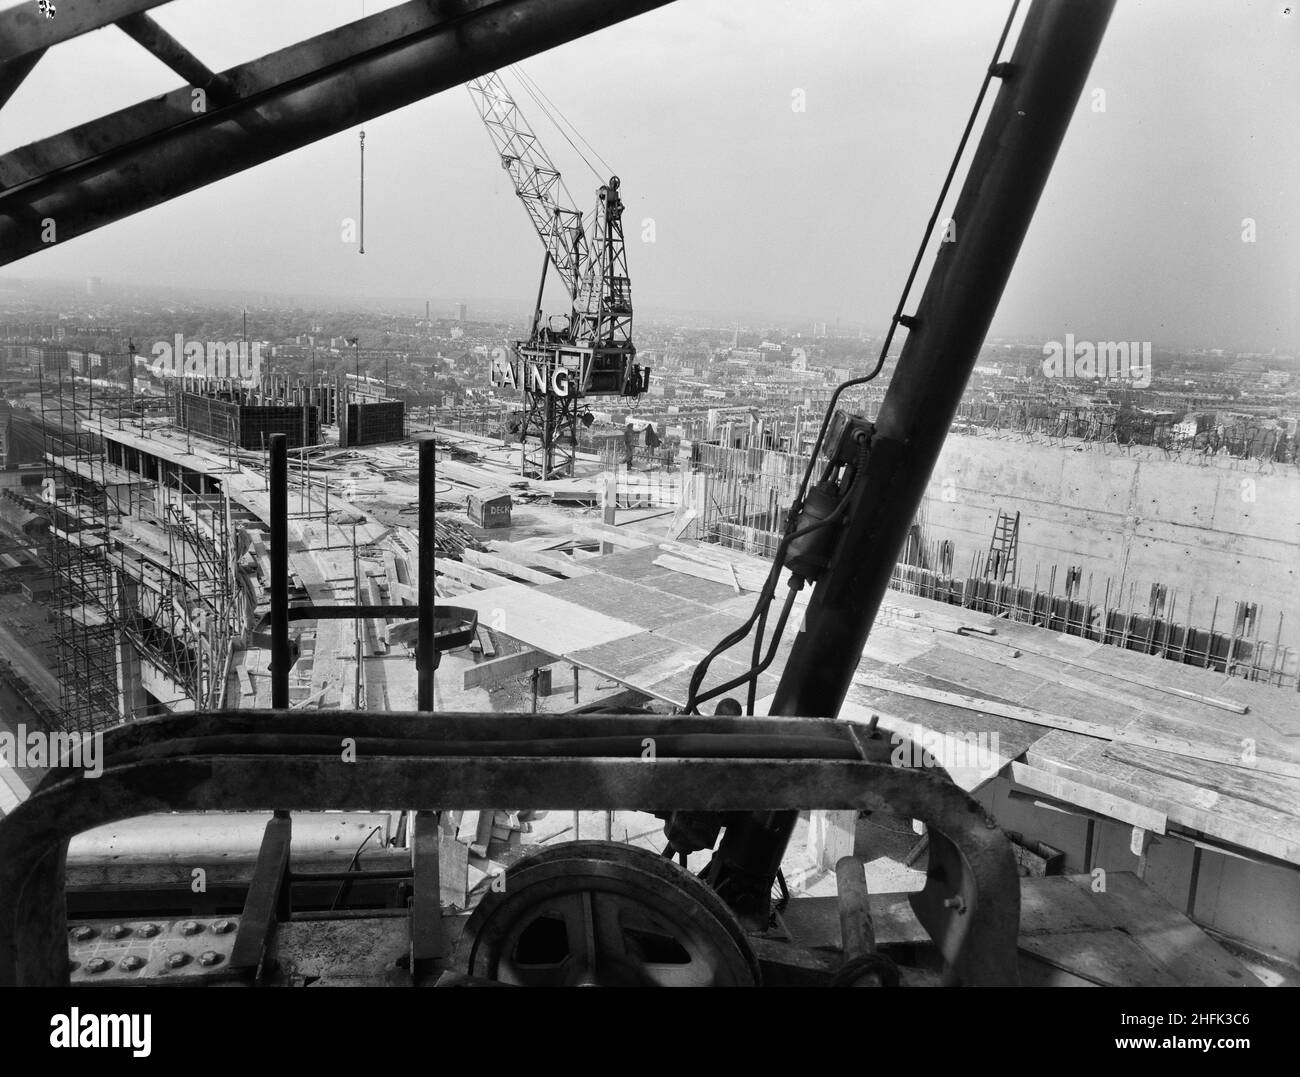 Empress State Building, Lillie Road, Earl's Court, Hammersmith and Fulham, London, 08/05/1961. A view looking north from the controls of one Laing crane towards another on the roof of the Empress State Building during its construction. Laing built the foundations and the reinforced concrete frame of the building, work began in November 1959 and ran until July 1961. Stock Photo